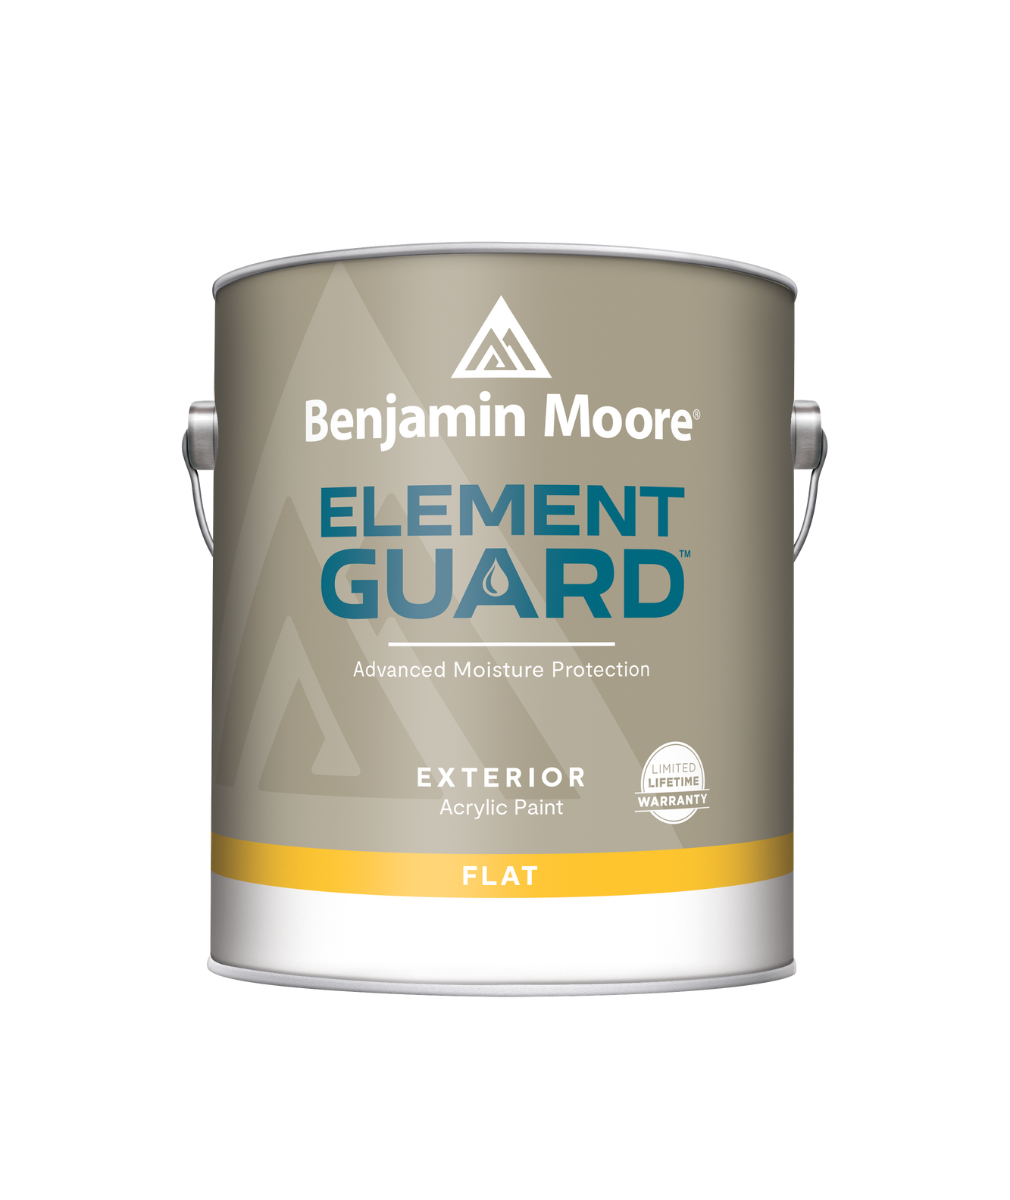 Benjamin Moore's Element Guard Exterior Flat Paint with Advanced Moisture Protection available at Catalina Paint.